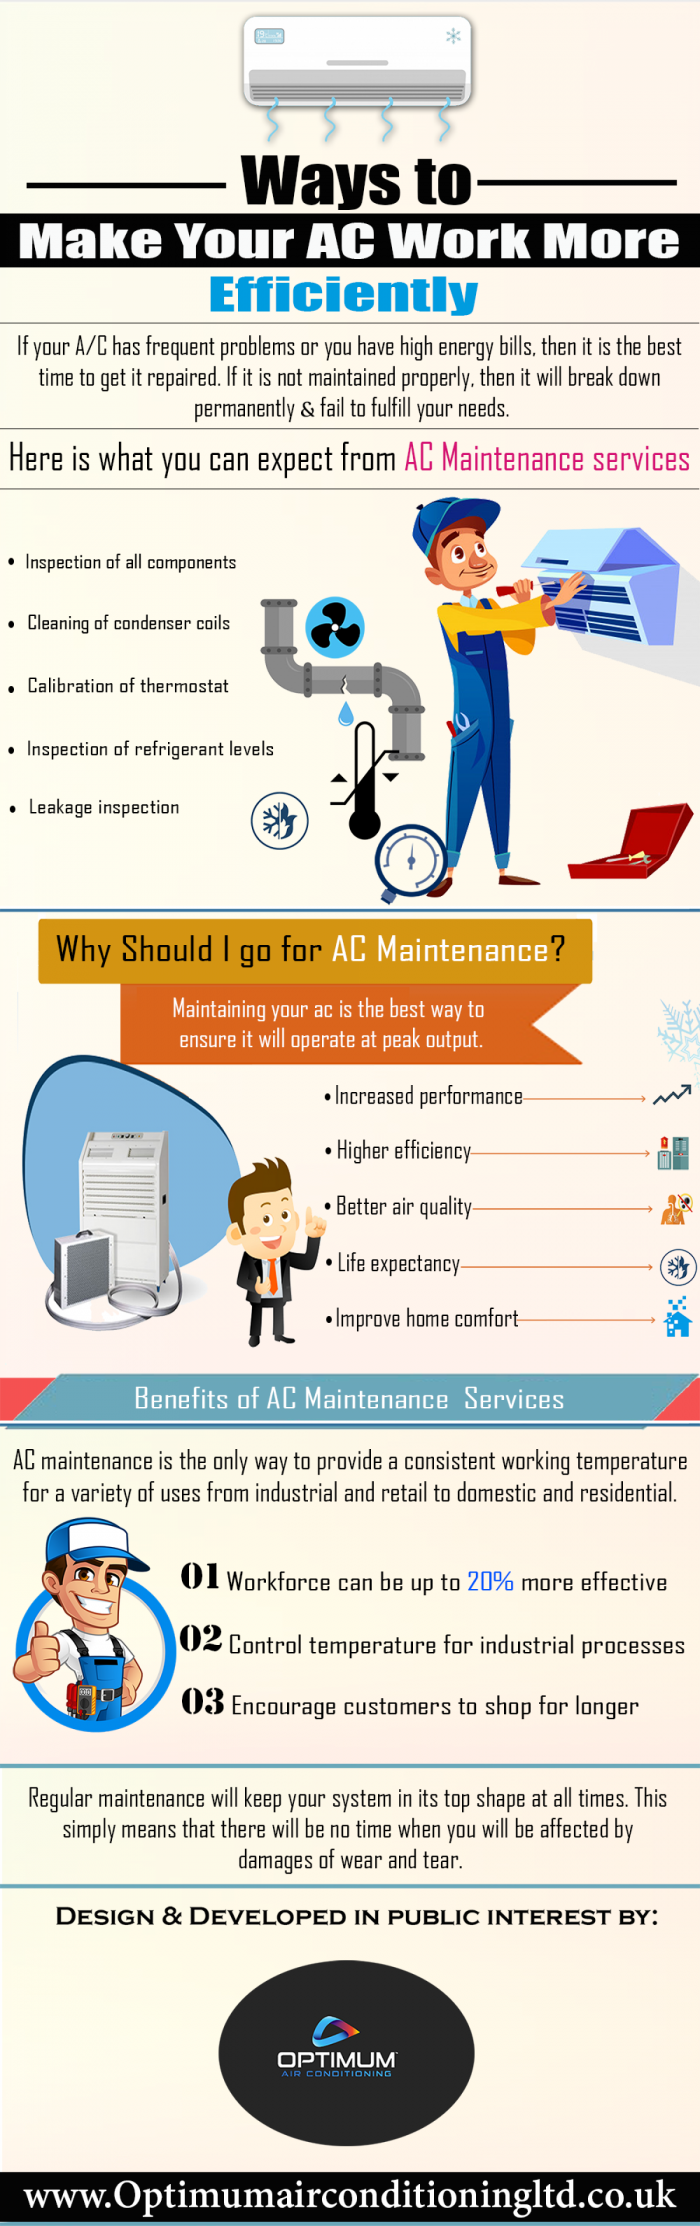 Ways To Make Your AC Work More Efficiently